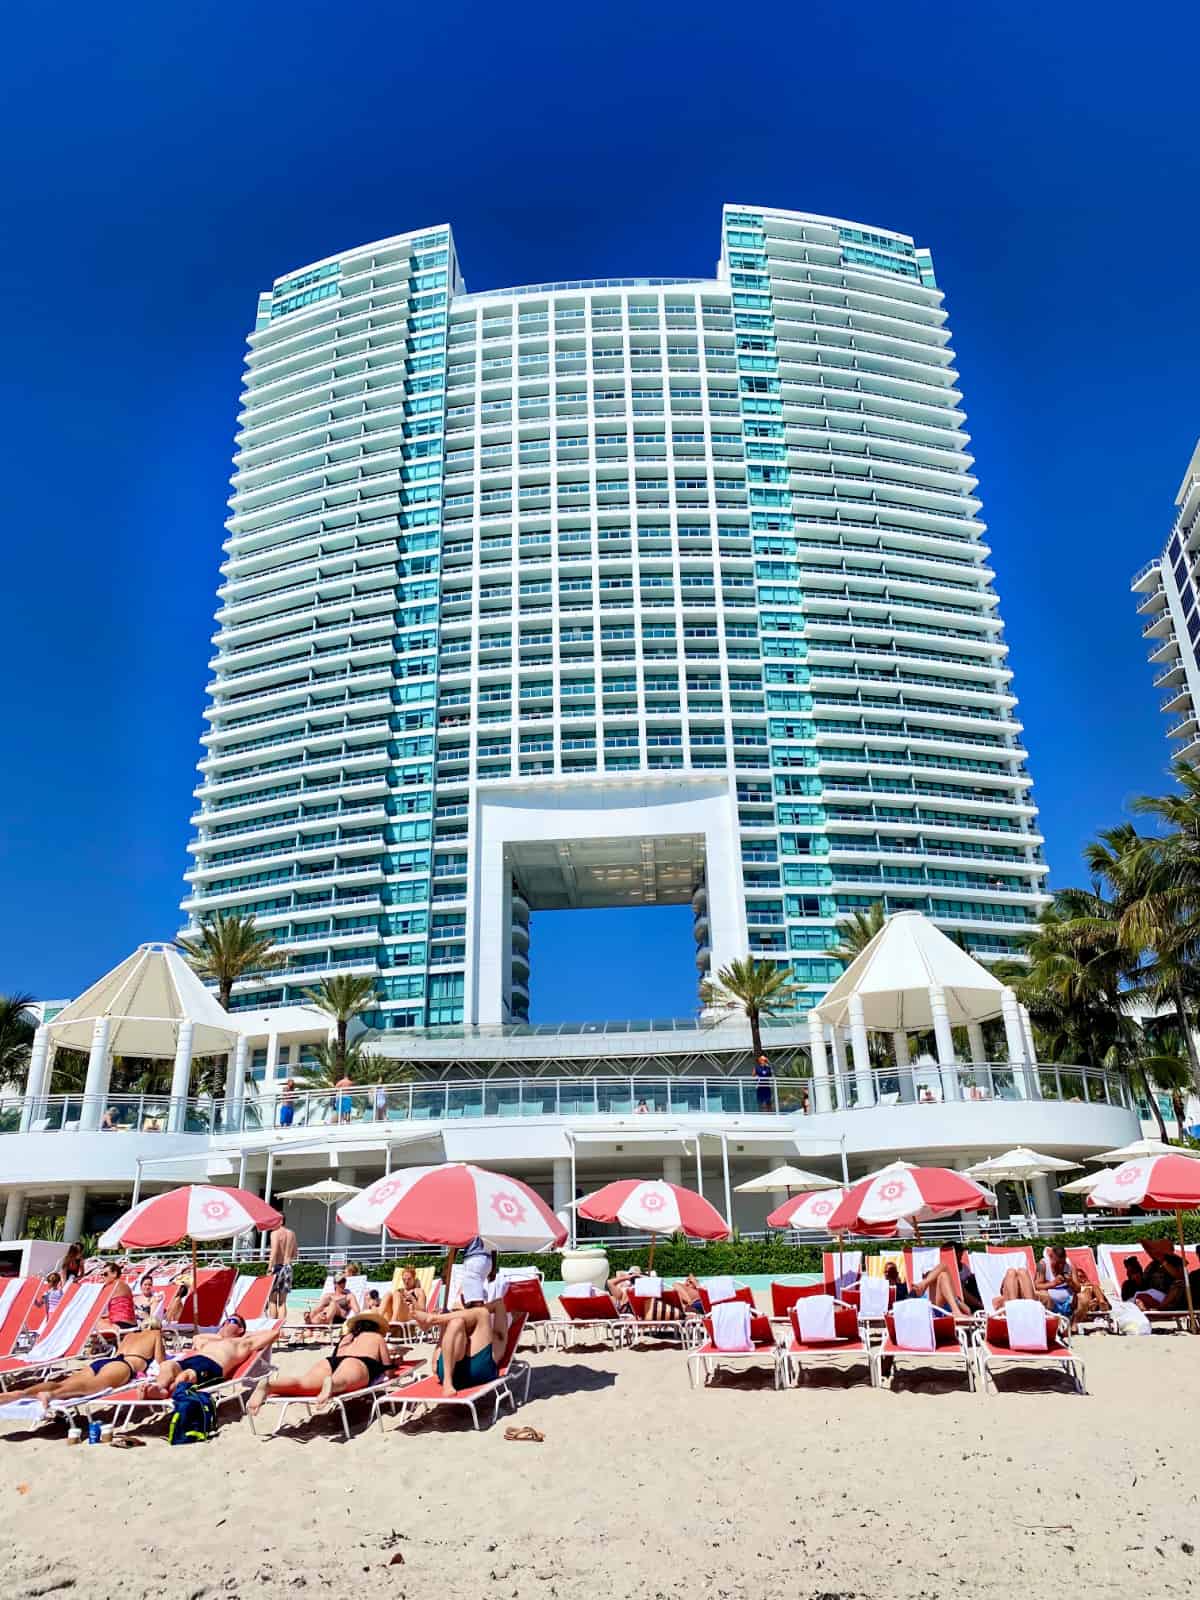 Tall building on the beach with lounge chairs and beach goers in front. 